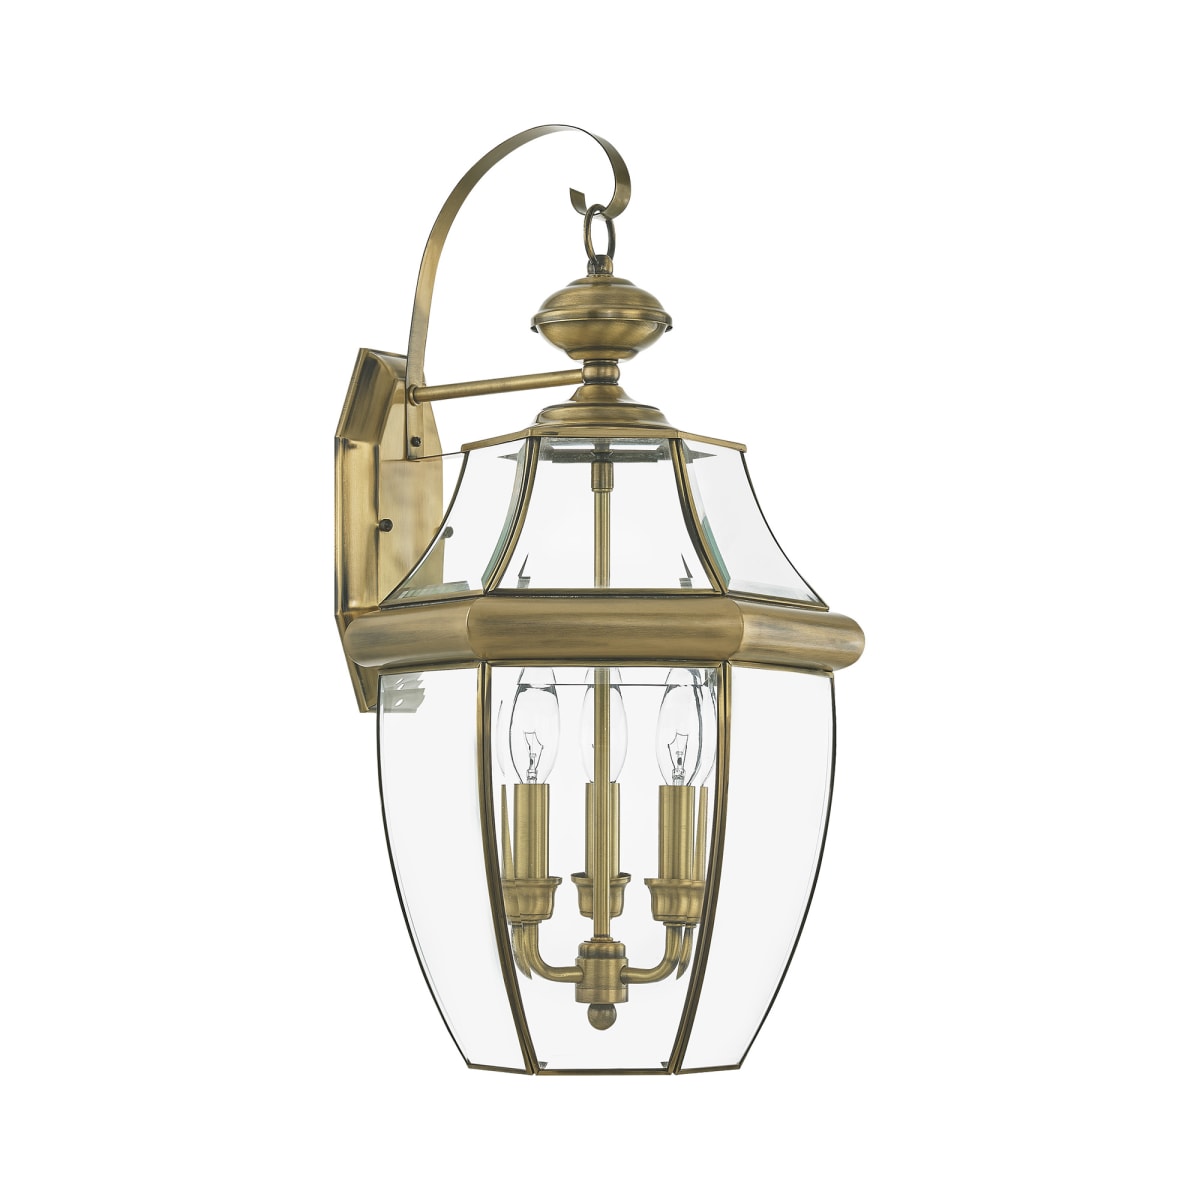 Antique Brass Livex Lighting 2351-01 Outdoor Wall Lantern with Clear Beveled Glass Shades